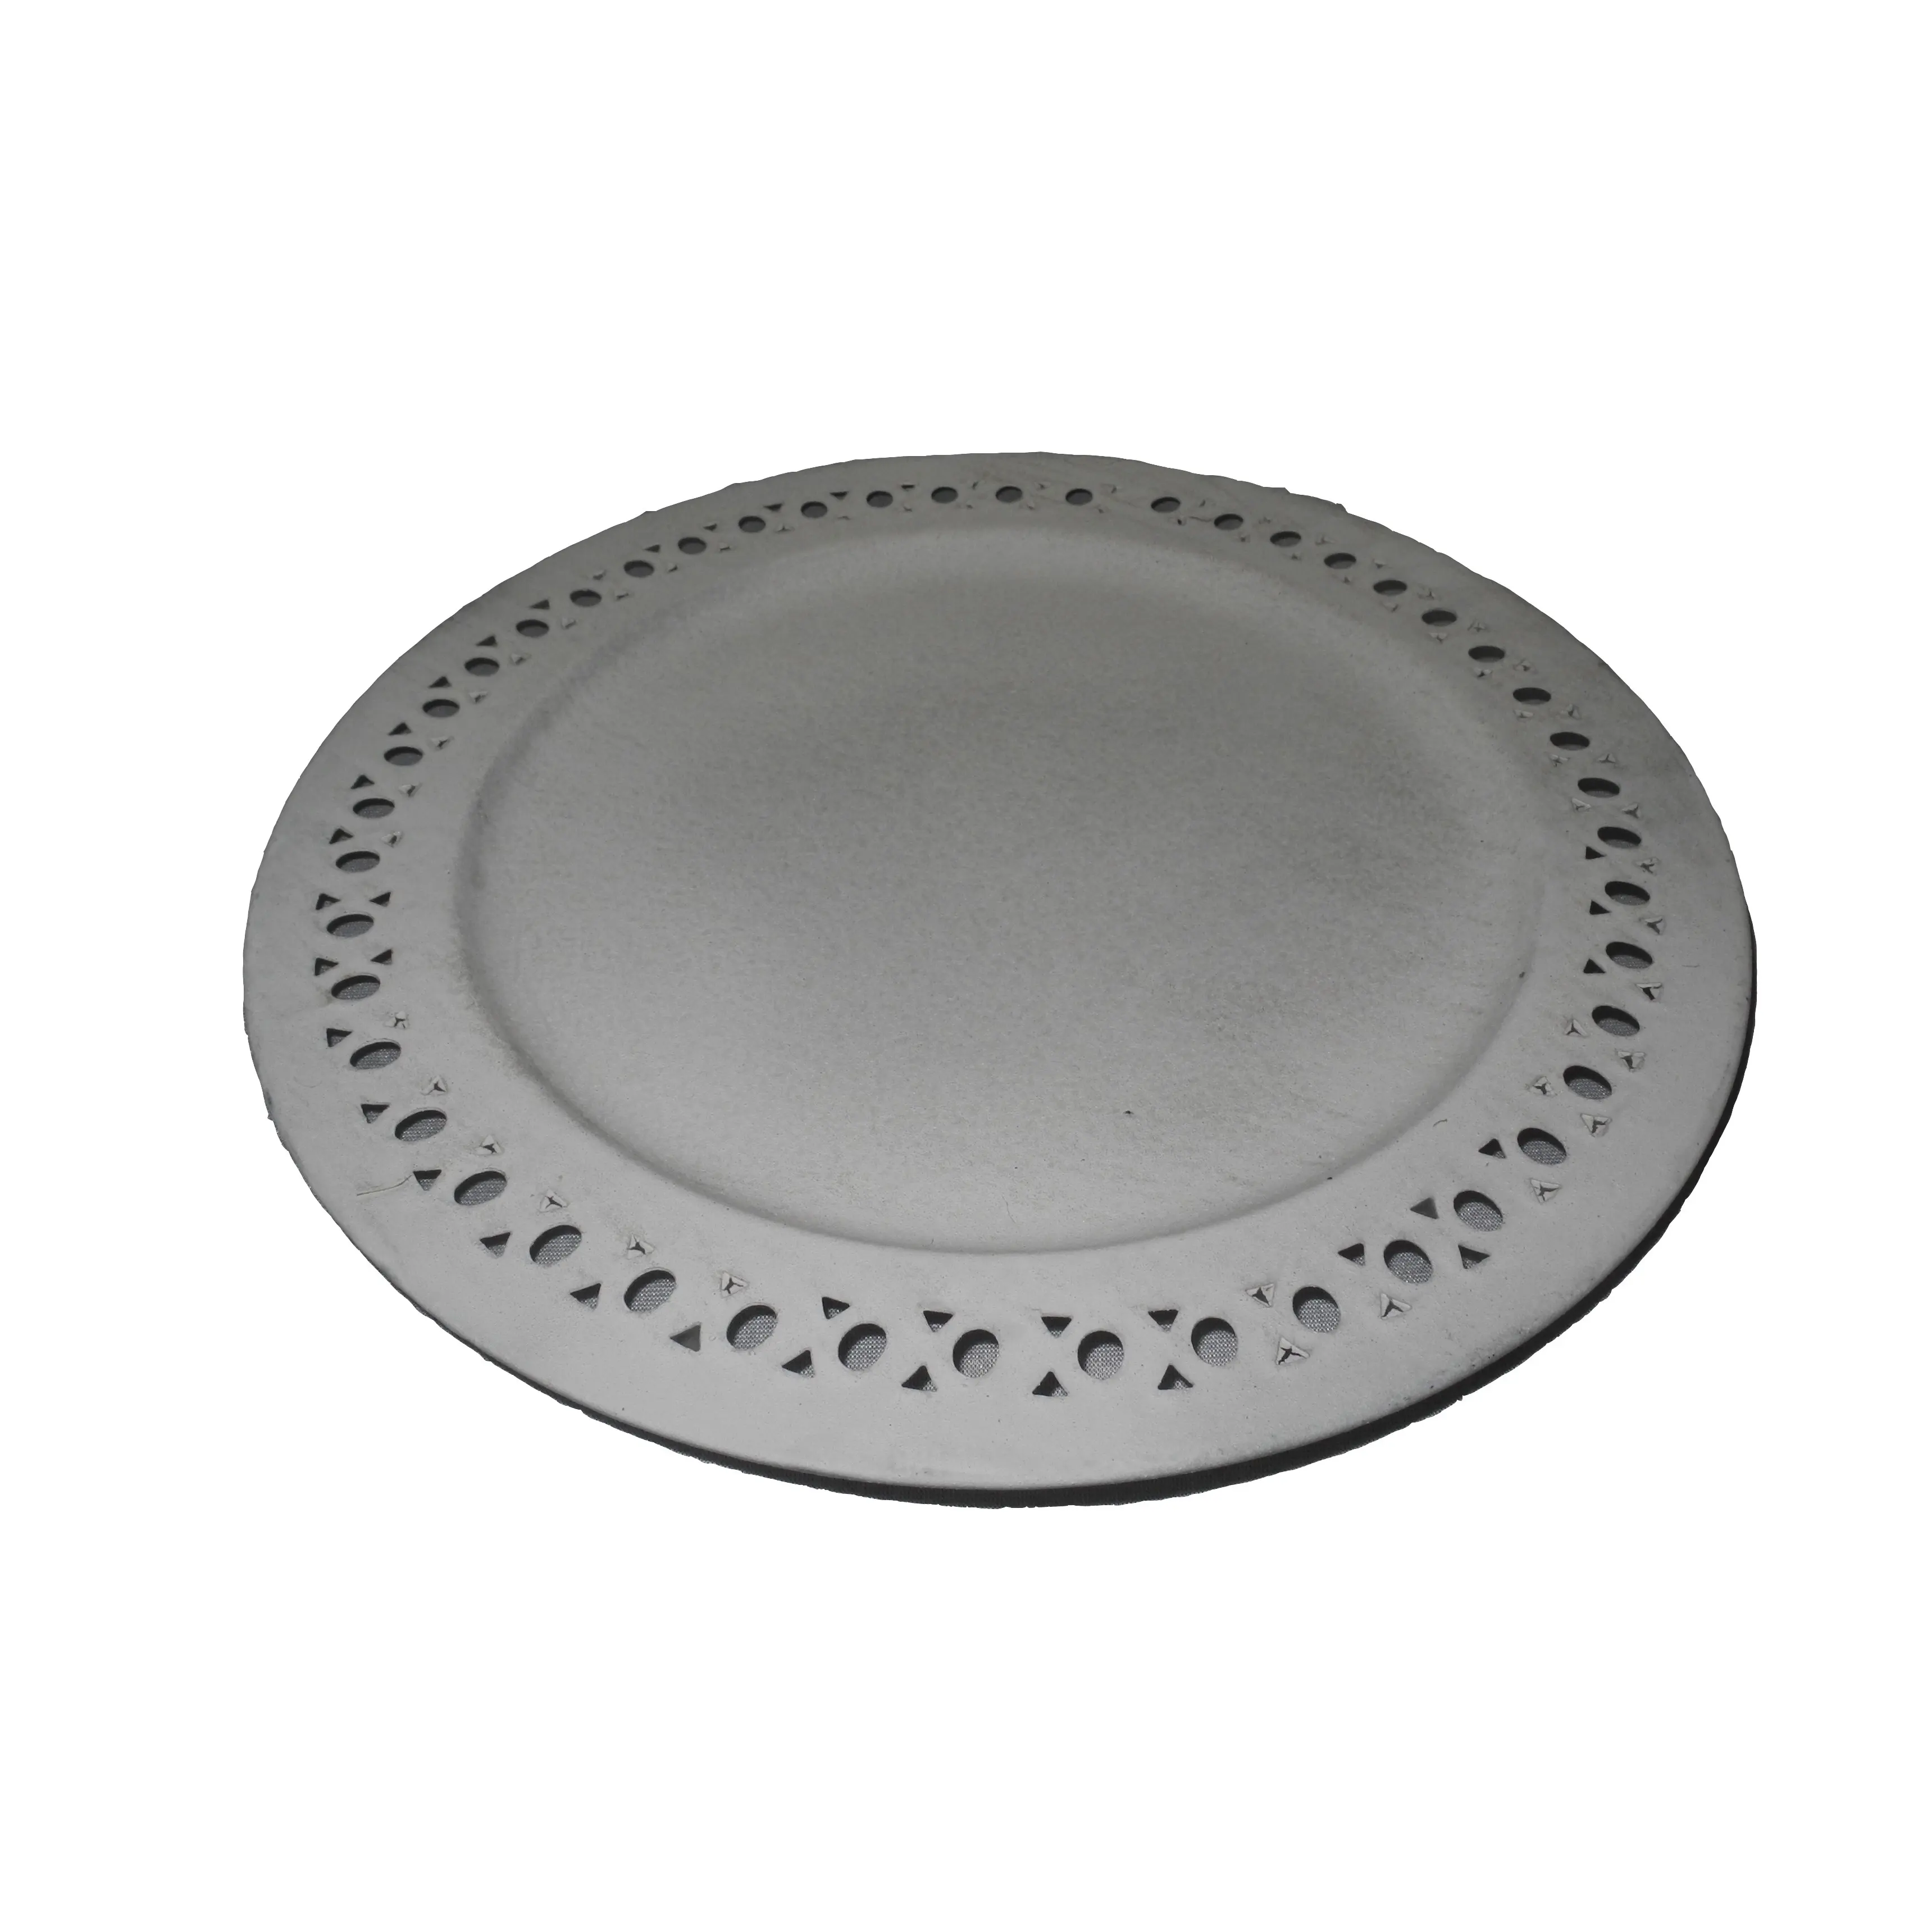 New Arrival Looking Charger Plate Dinner Table Decoration Rounded Shape Charger Plate